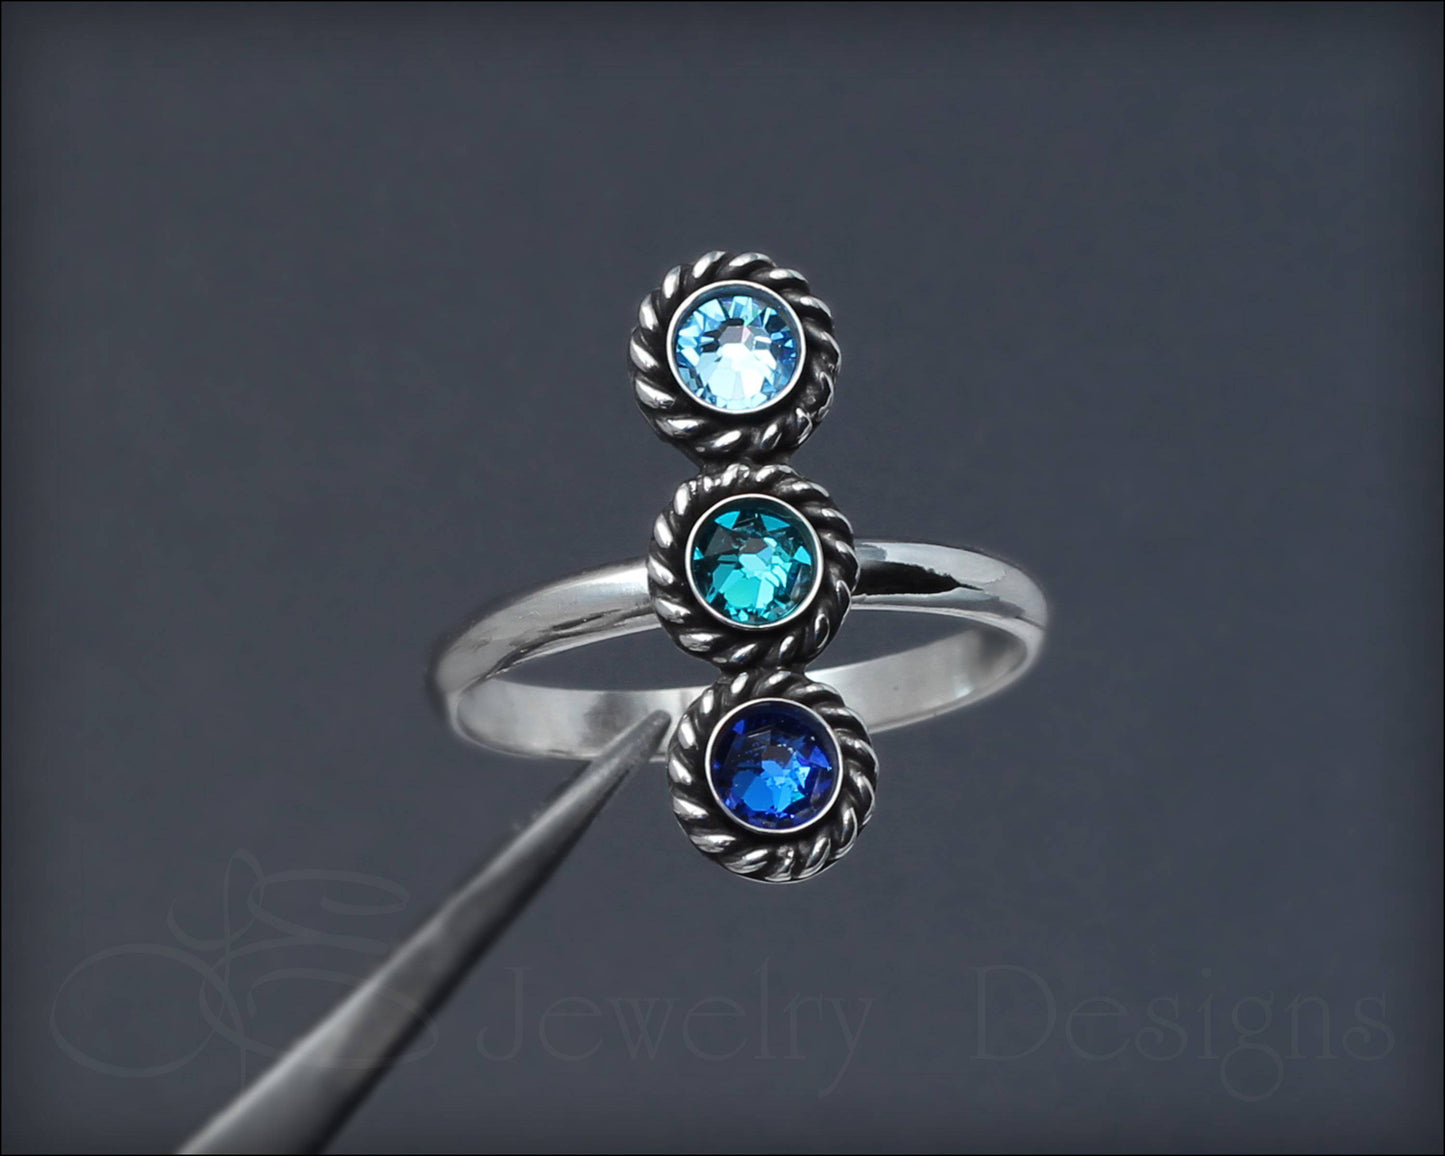 Load image into Gallery viewer, 3-Stone Vertical Ring (w/birthstones or opals) - LE Jewelry Designs
